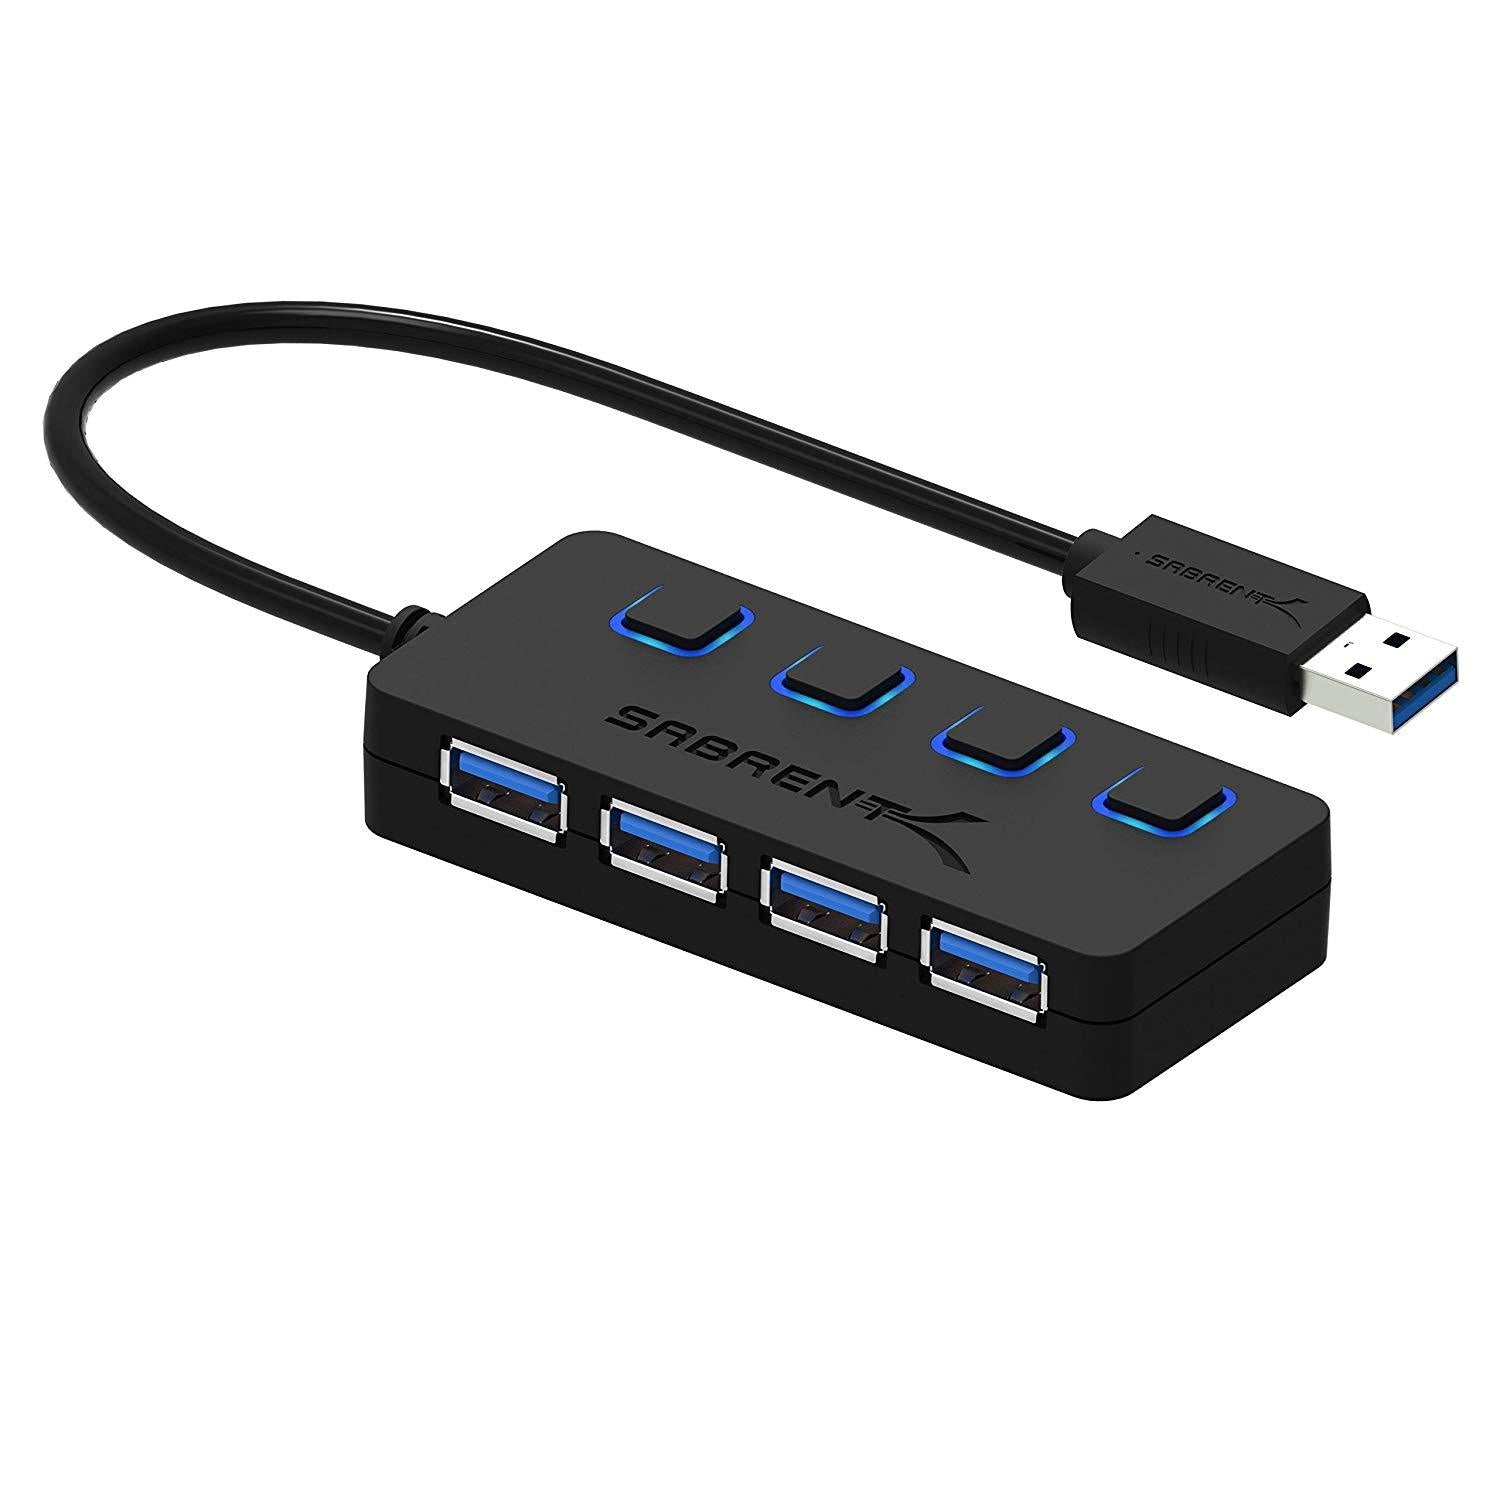 Sabrent 4 Port USB 3.0 Hub w/ Individual Power Switch and LED - Store 974 | ستور ٩٧٤